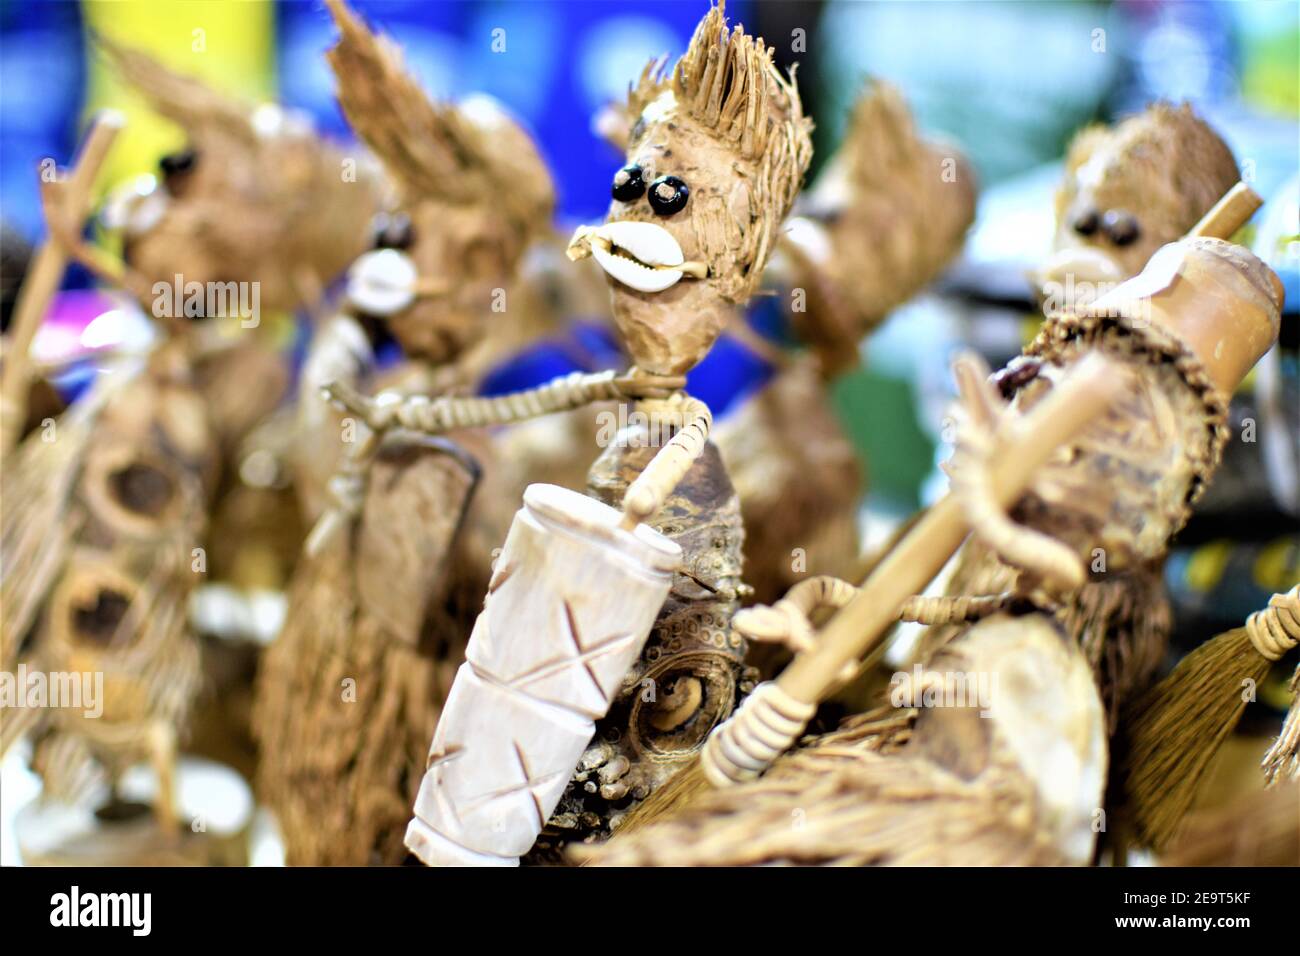 Native figures of a tribal music band made of cork, seashells, and coconut husk Stock Photo